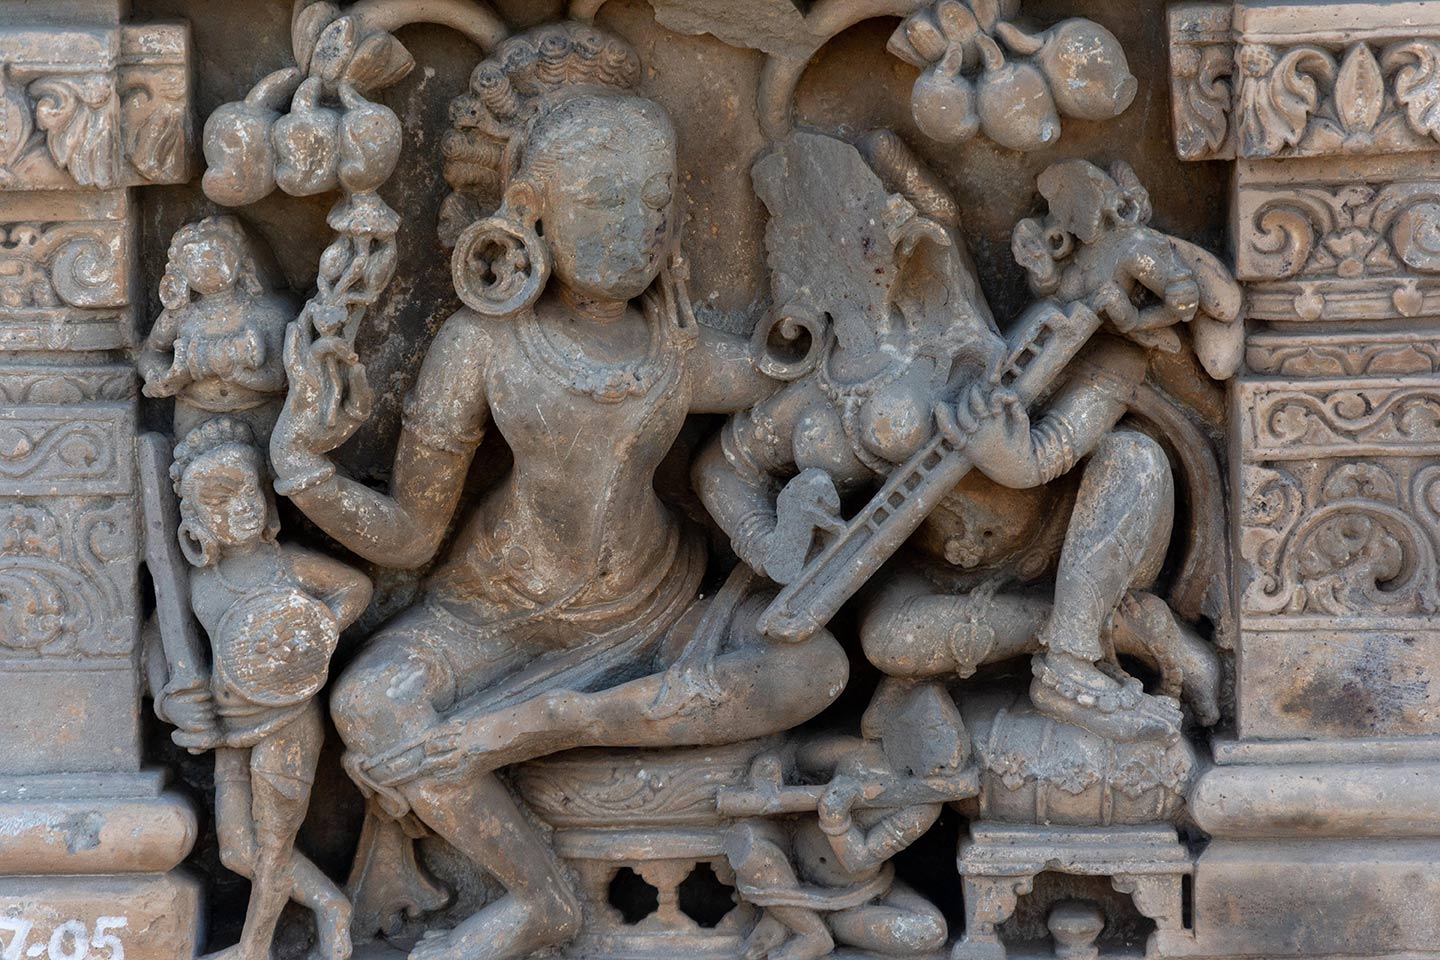 The central male figure and female figures are enjoying a musical concert in a grove. They are seated on raised circular seats, and the male is seated in the lalitasana pose. The female figure is leaning towards the male and playing a stringed musical instrument (likely a veena). They are surrounded by four smaller figures.